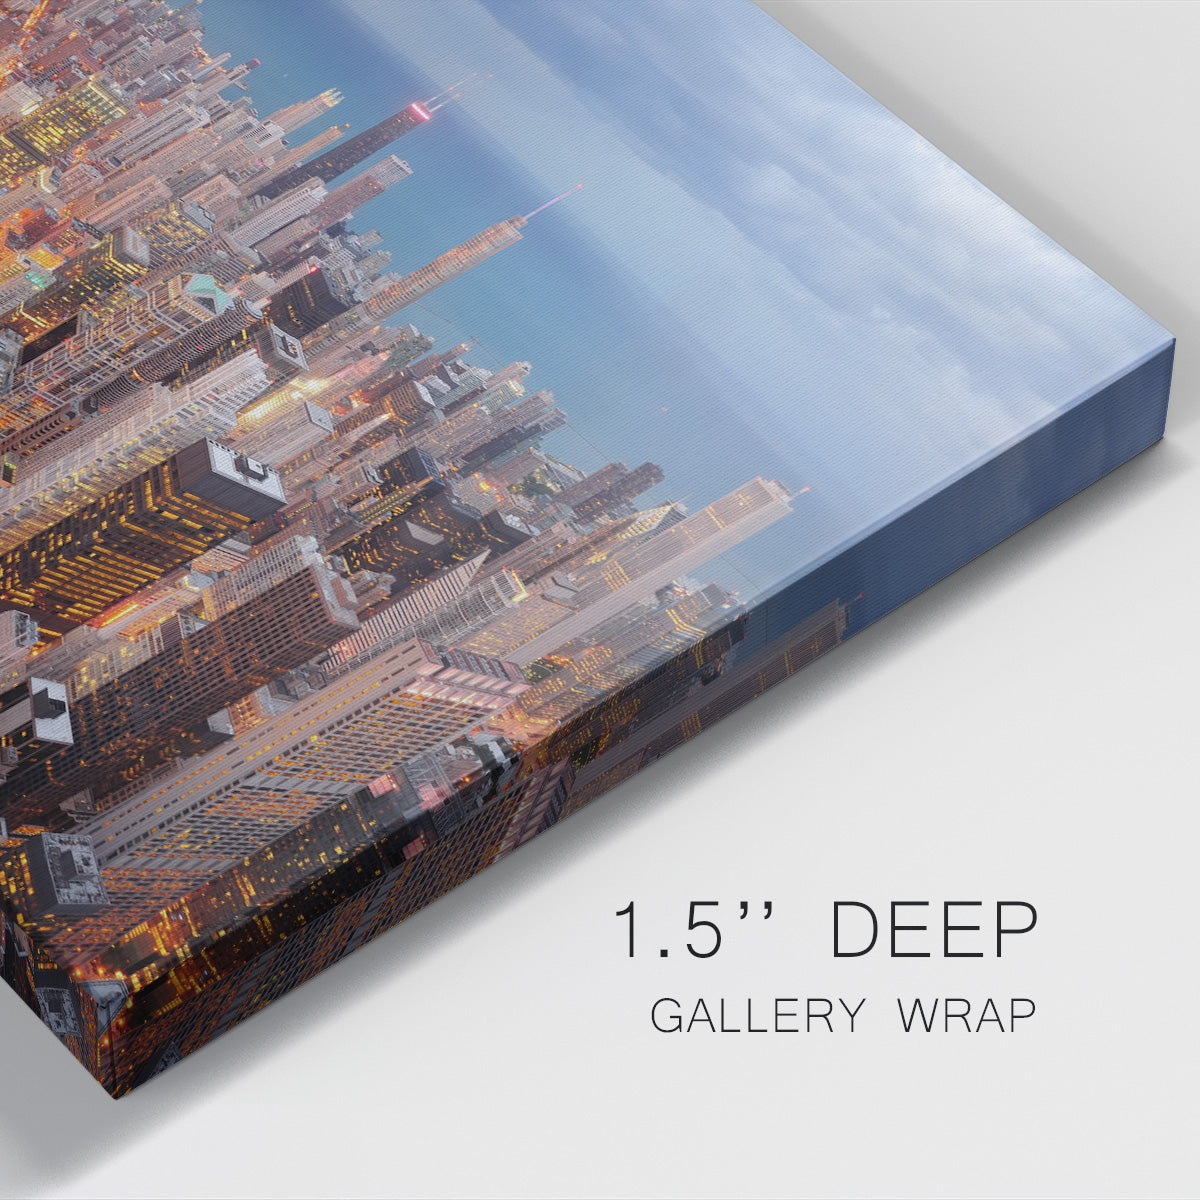 Chicago Aerial - Gallery Wrapped Canvas